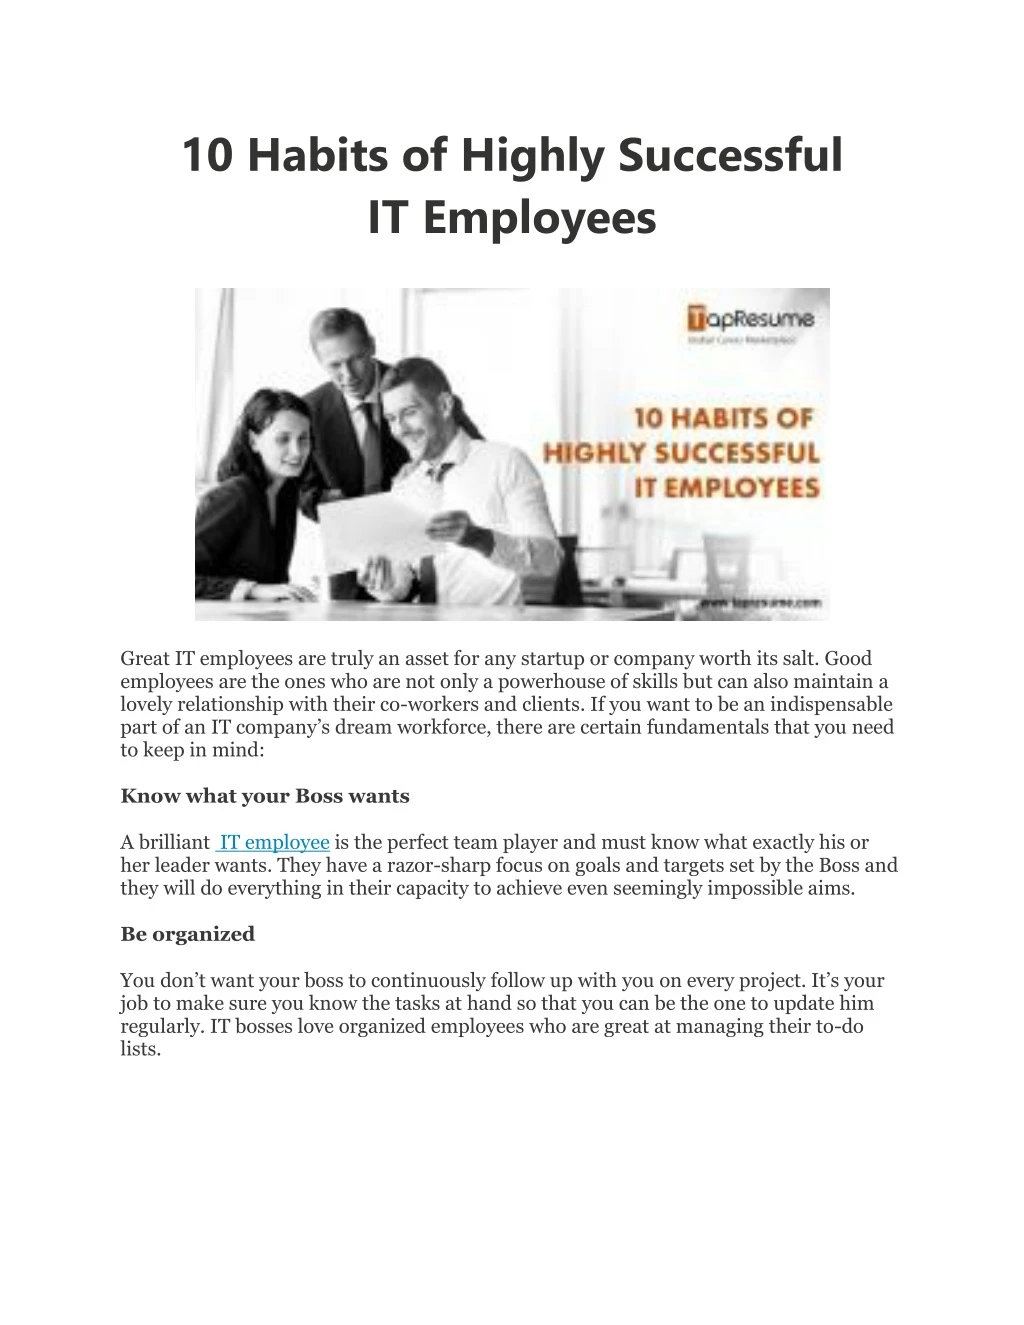 10 habits of highly successful it employees